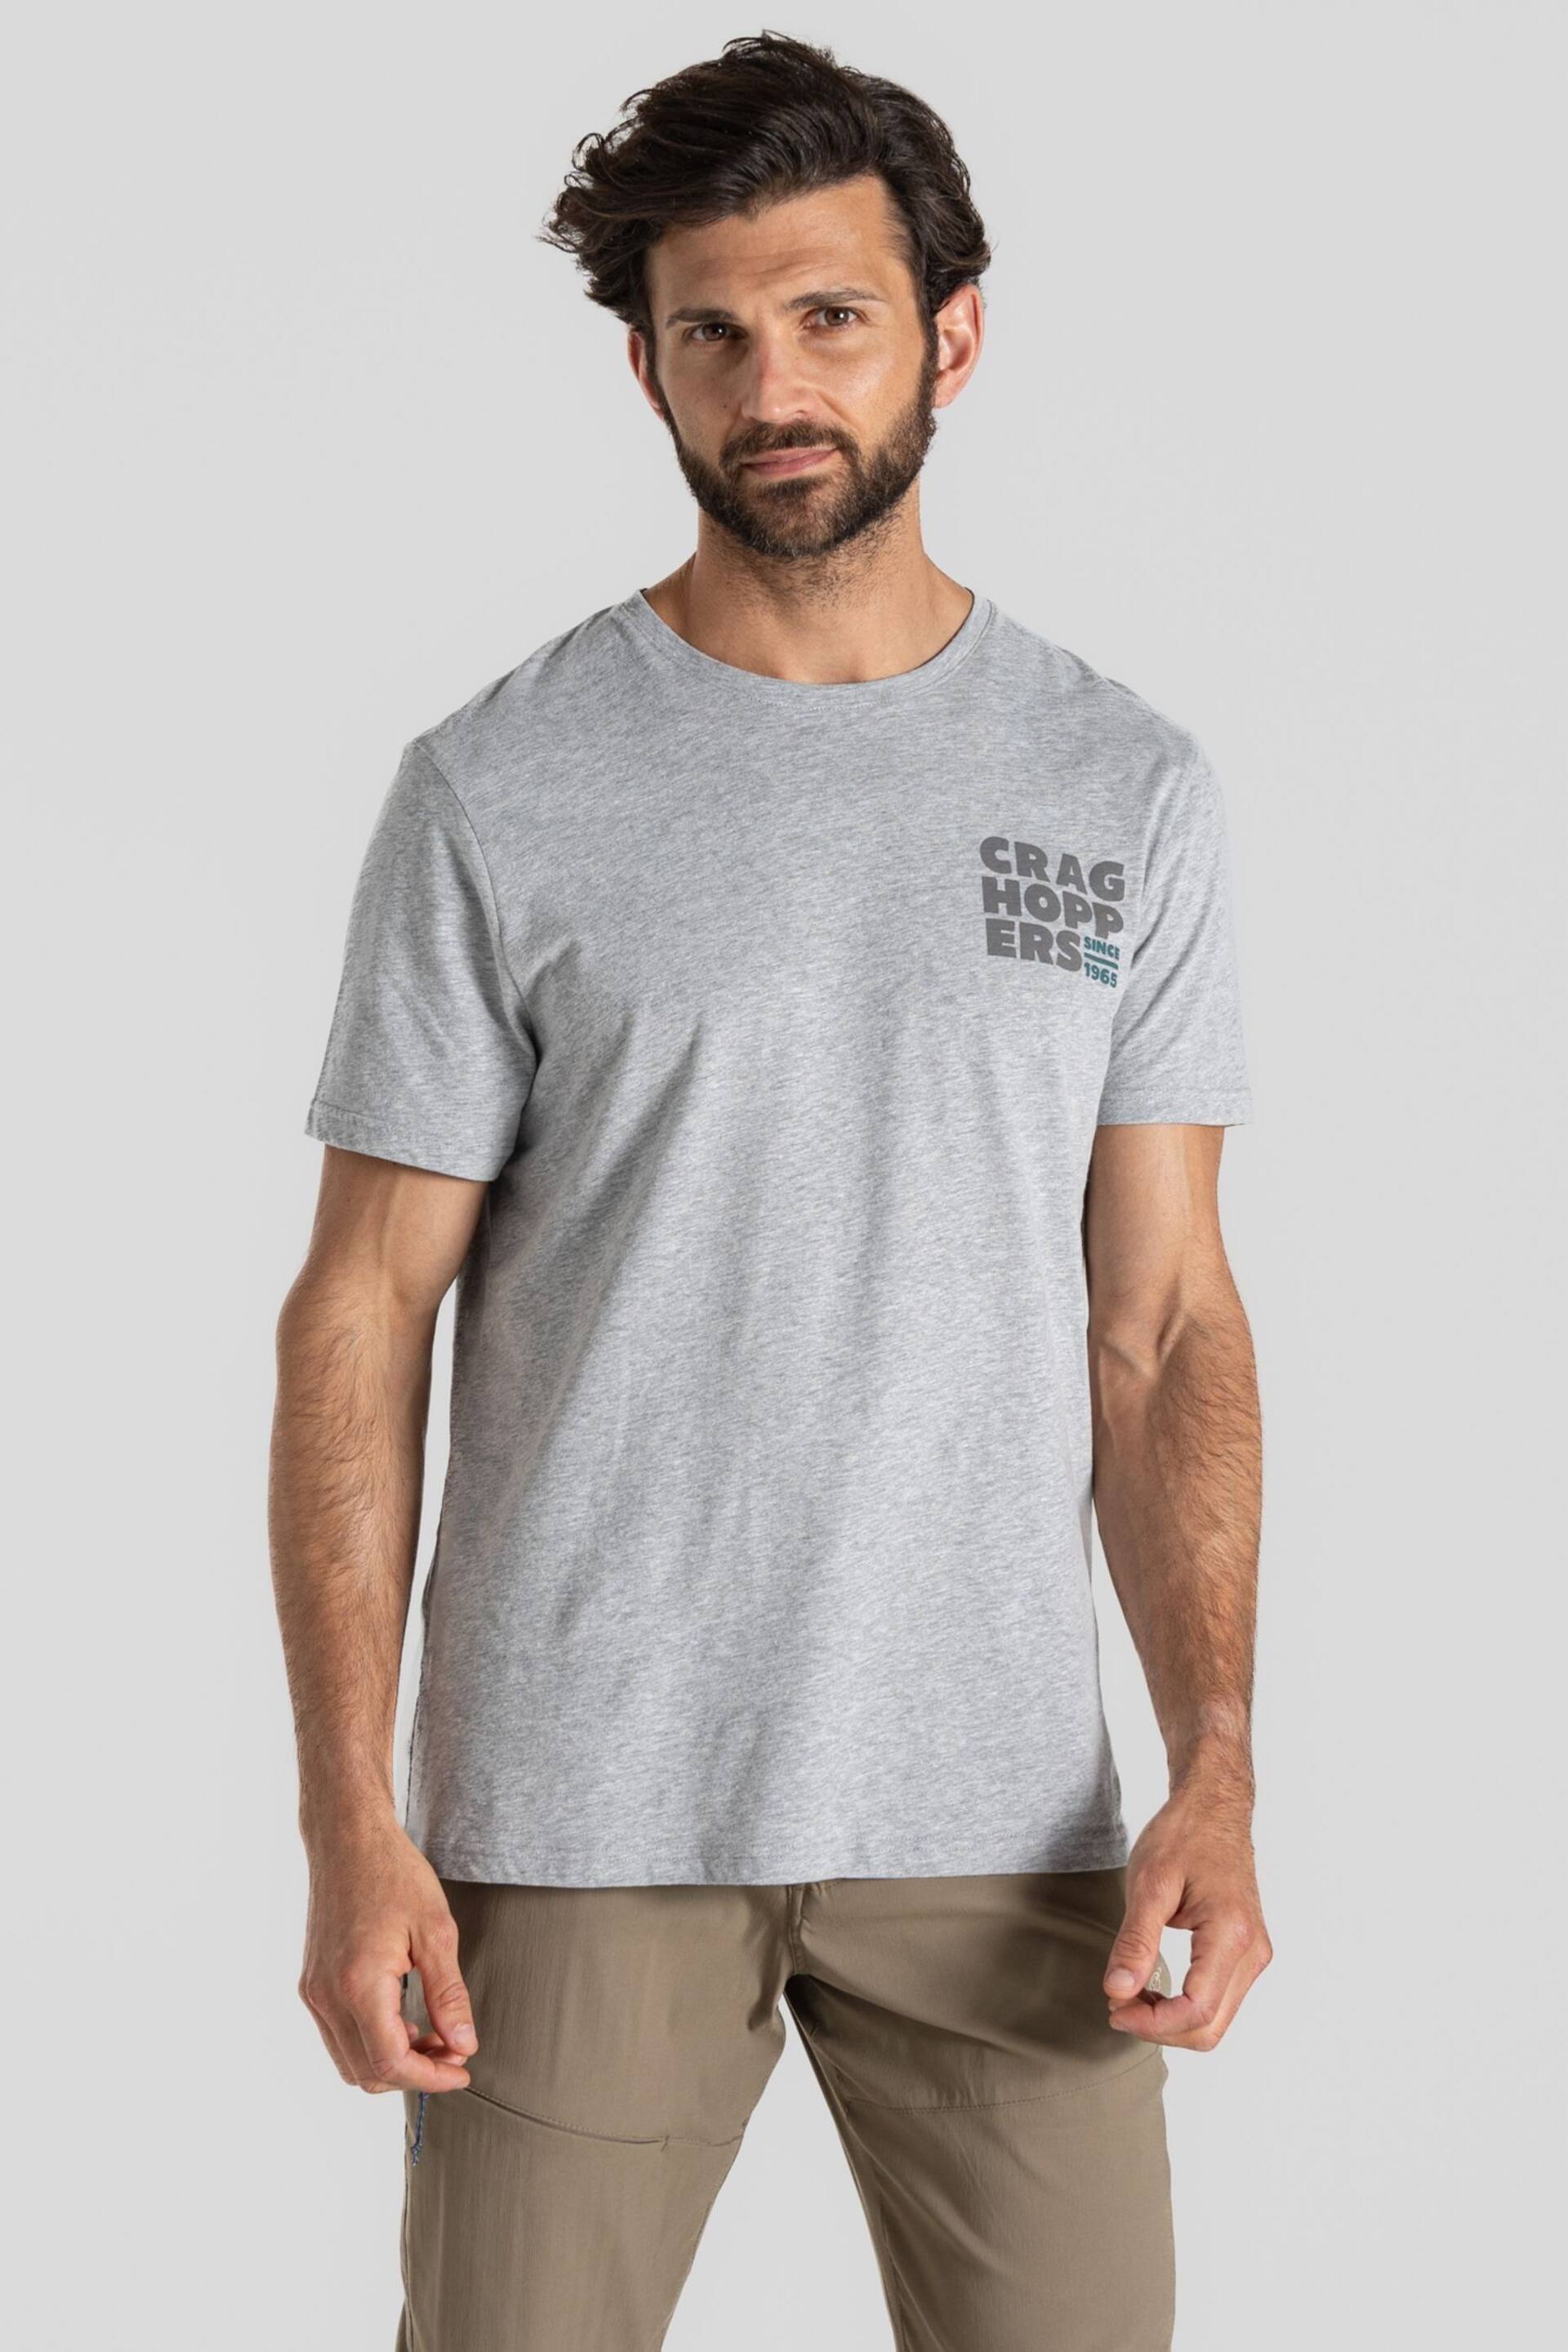 Craghoppers Grey Lucent Short Sleeve T-Shirt - Image 1 of 5